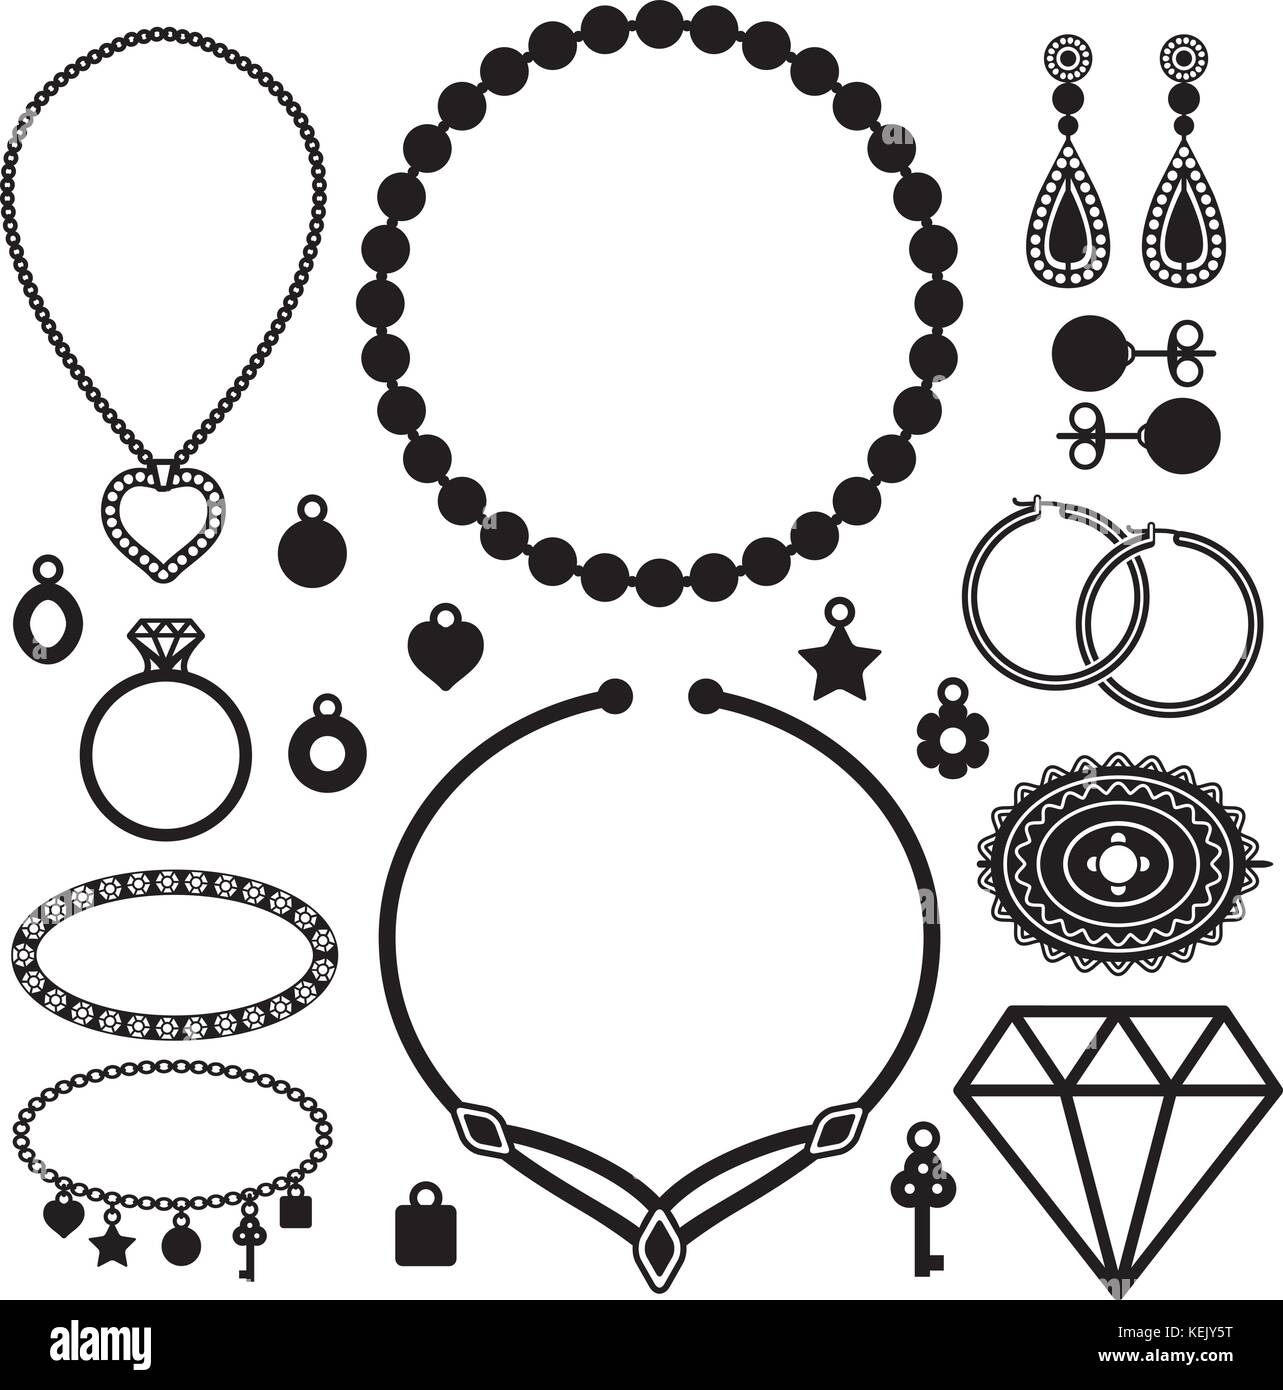 Various jewelry silhouette icons vector set. Stock Vector